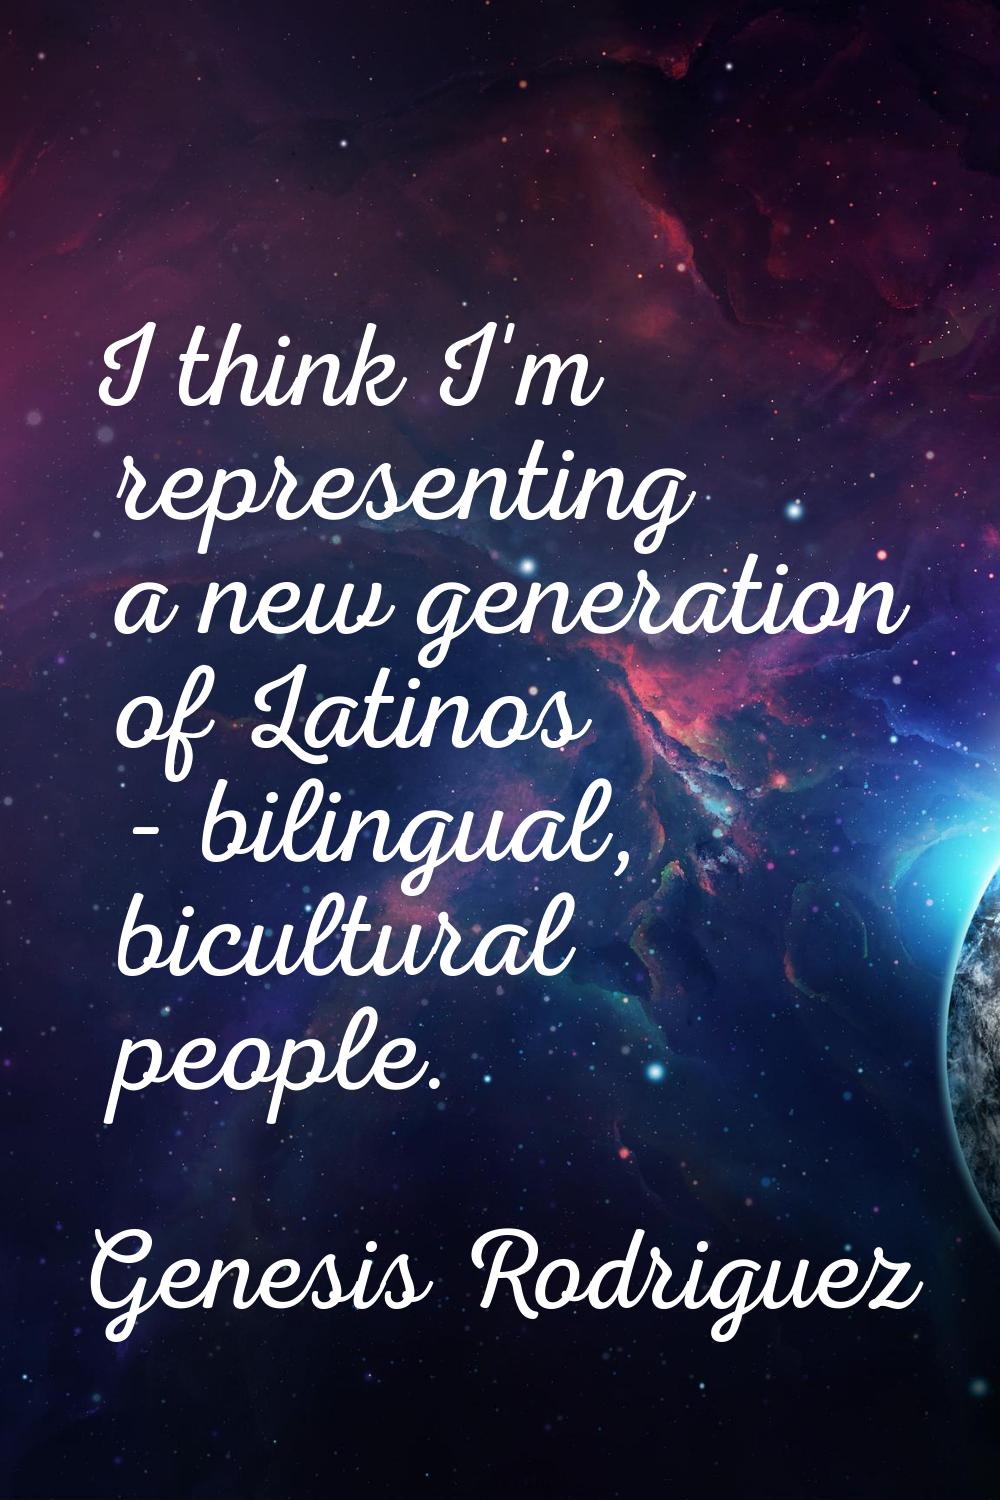 I think I'm representing a new generation of Latinos - bilingual, bicultural people.